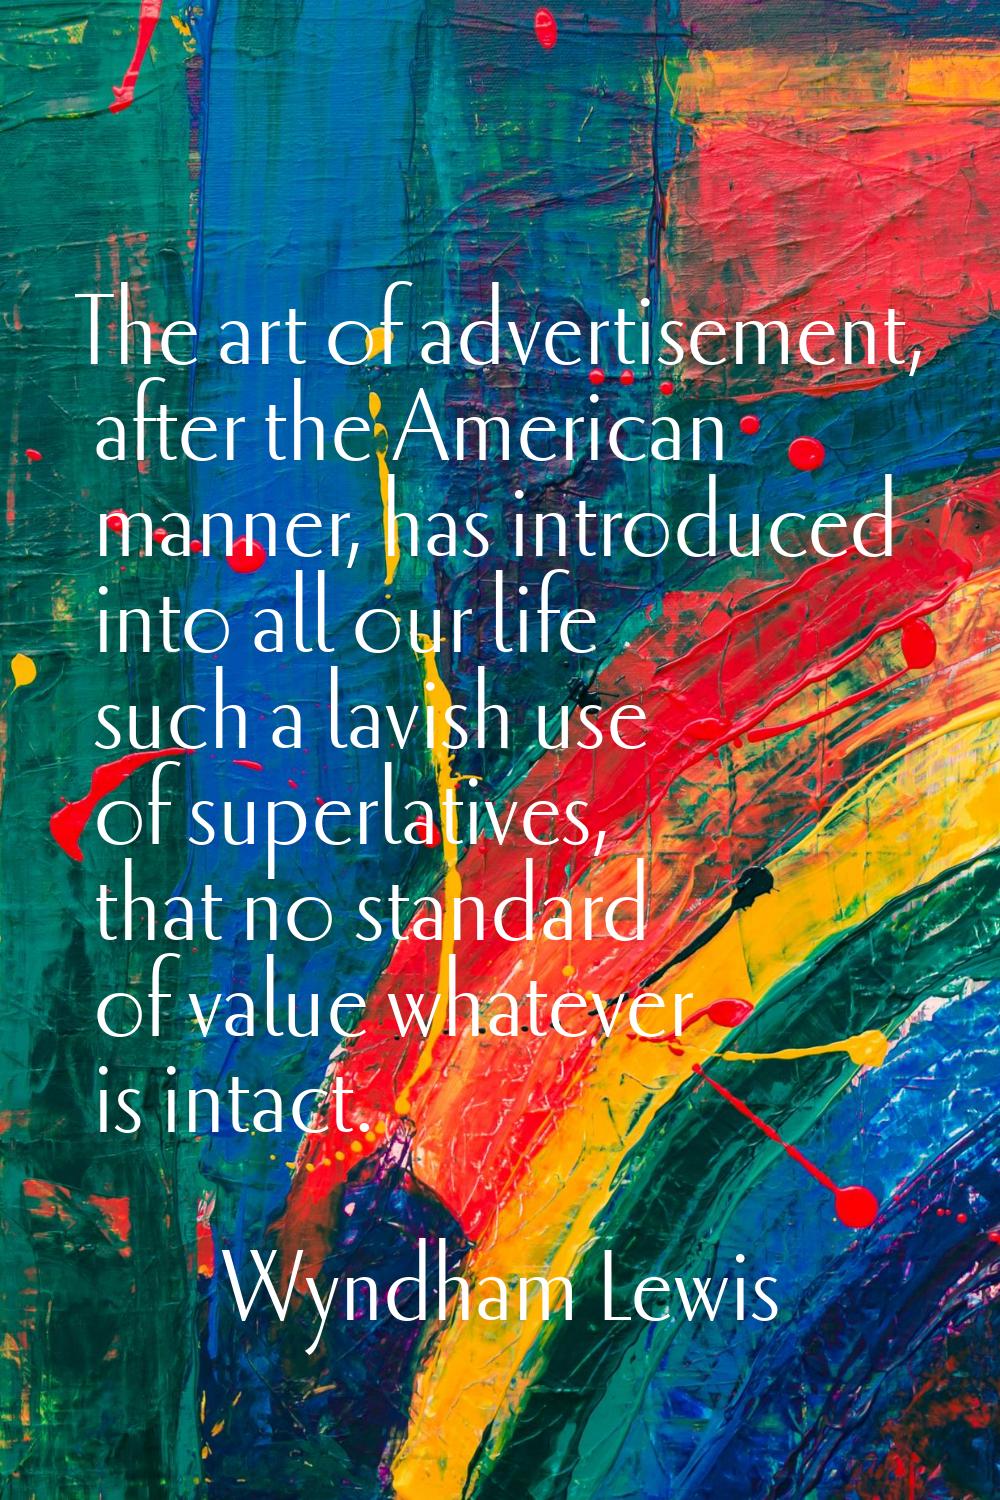 The art of advertisement, after the American manner, has introduced into all our life such a lavish